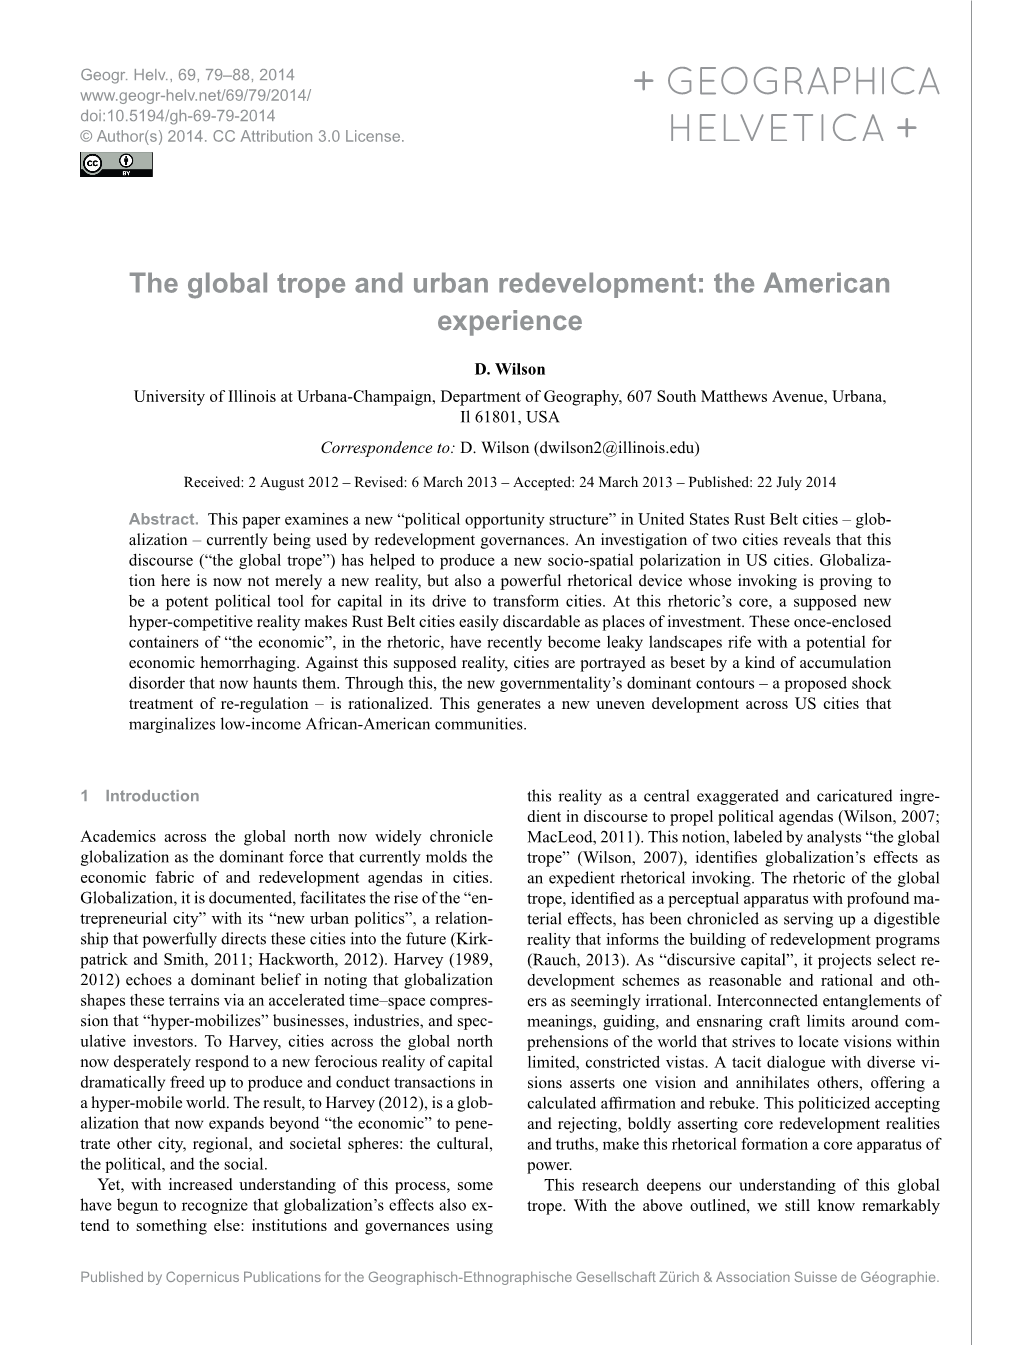 The Global Trope and Urban Redevelopment: the American Experience